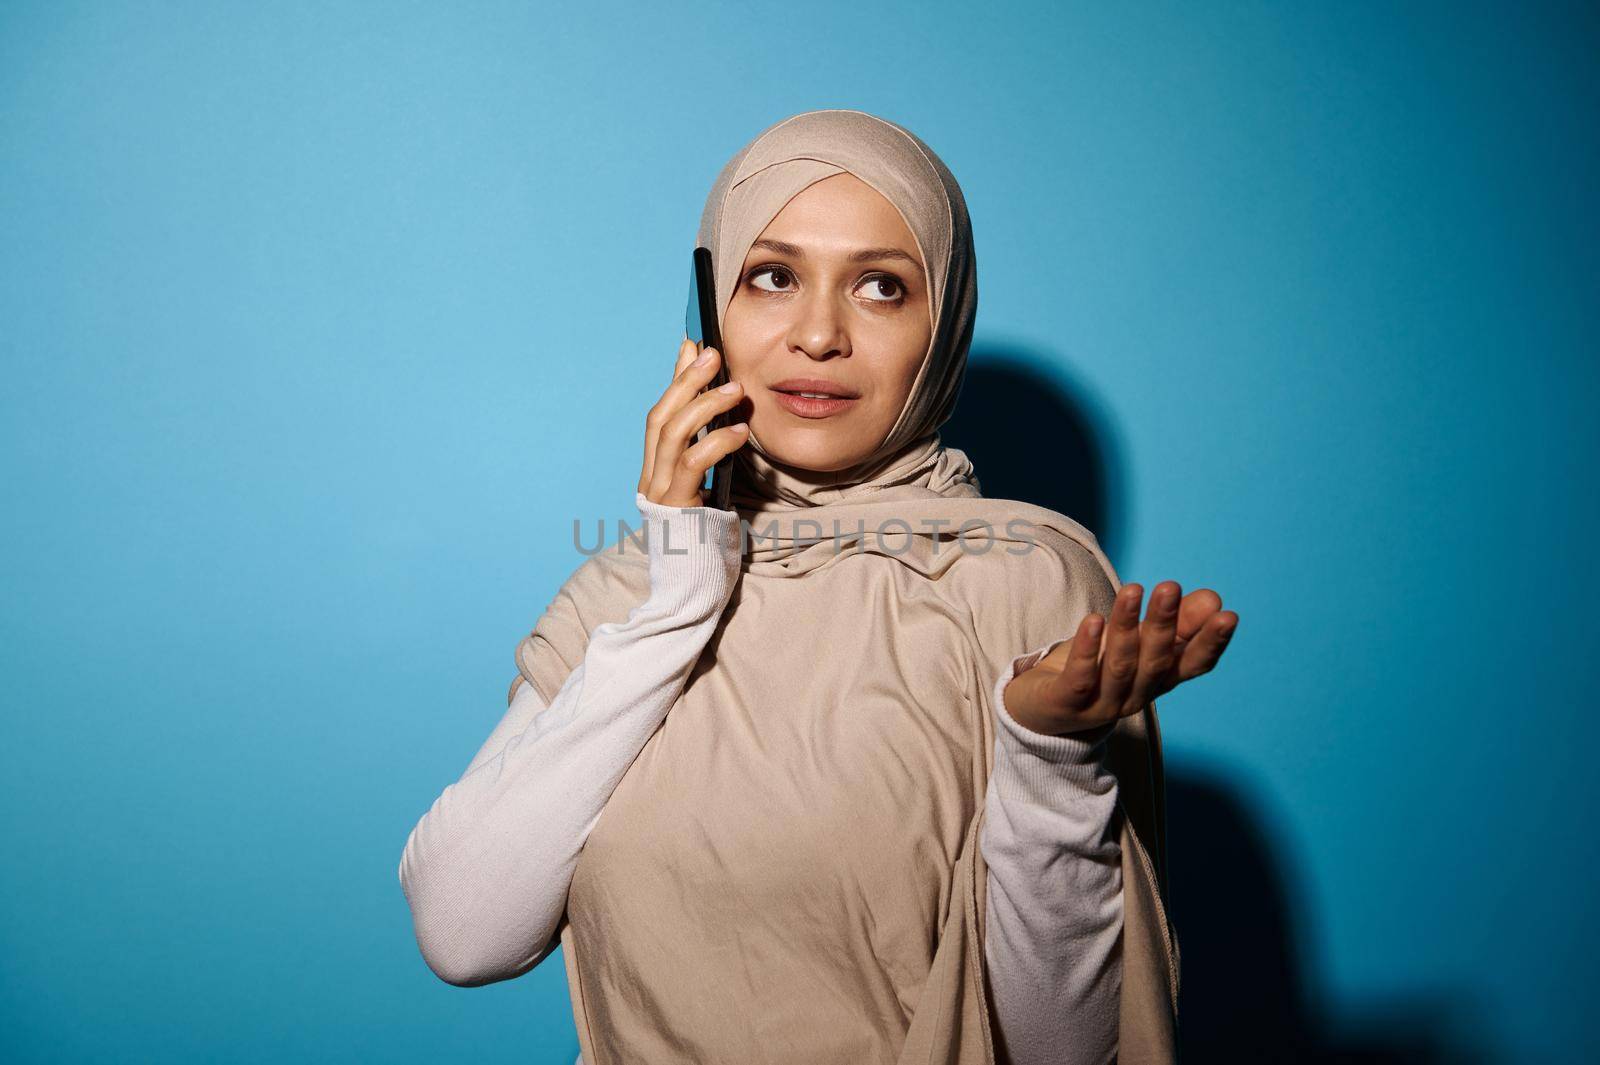 Arab Woman with covered head talking on mobile phone, and gesturing with her hand. Blue Background with copy space